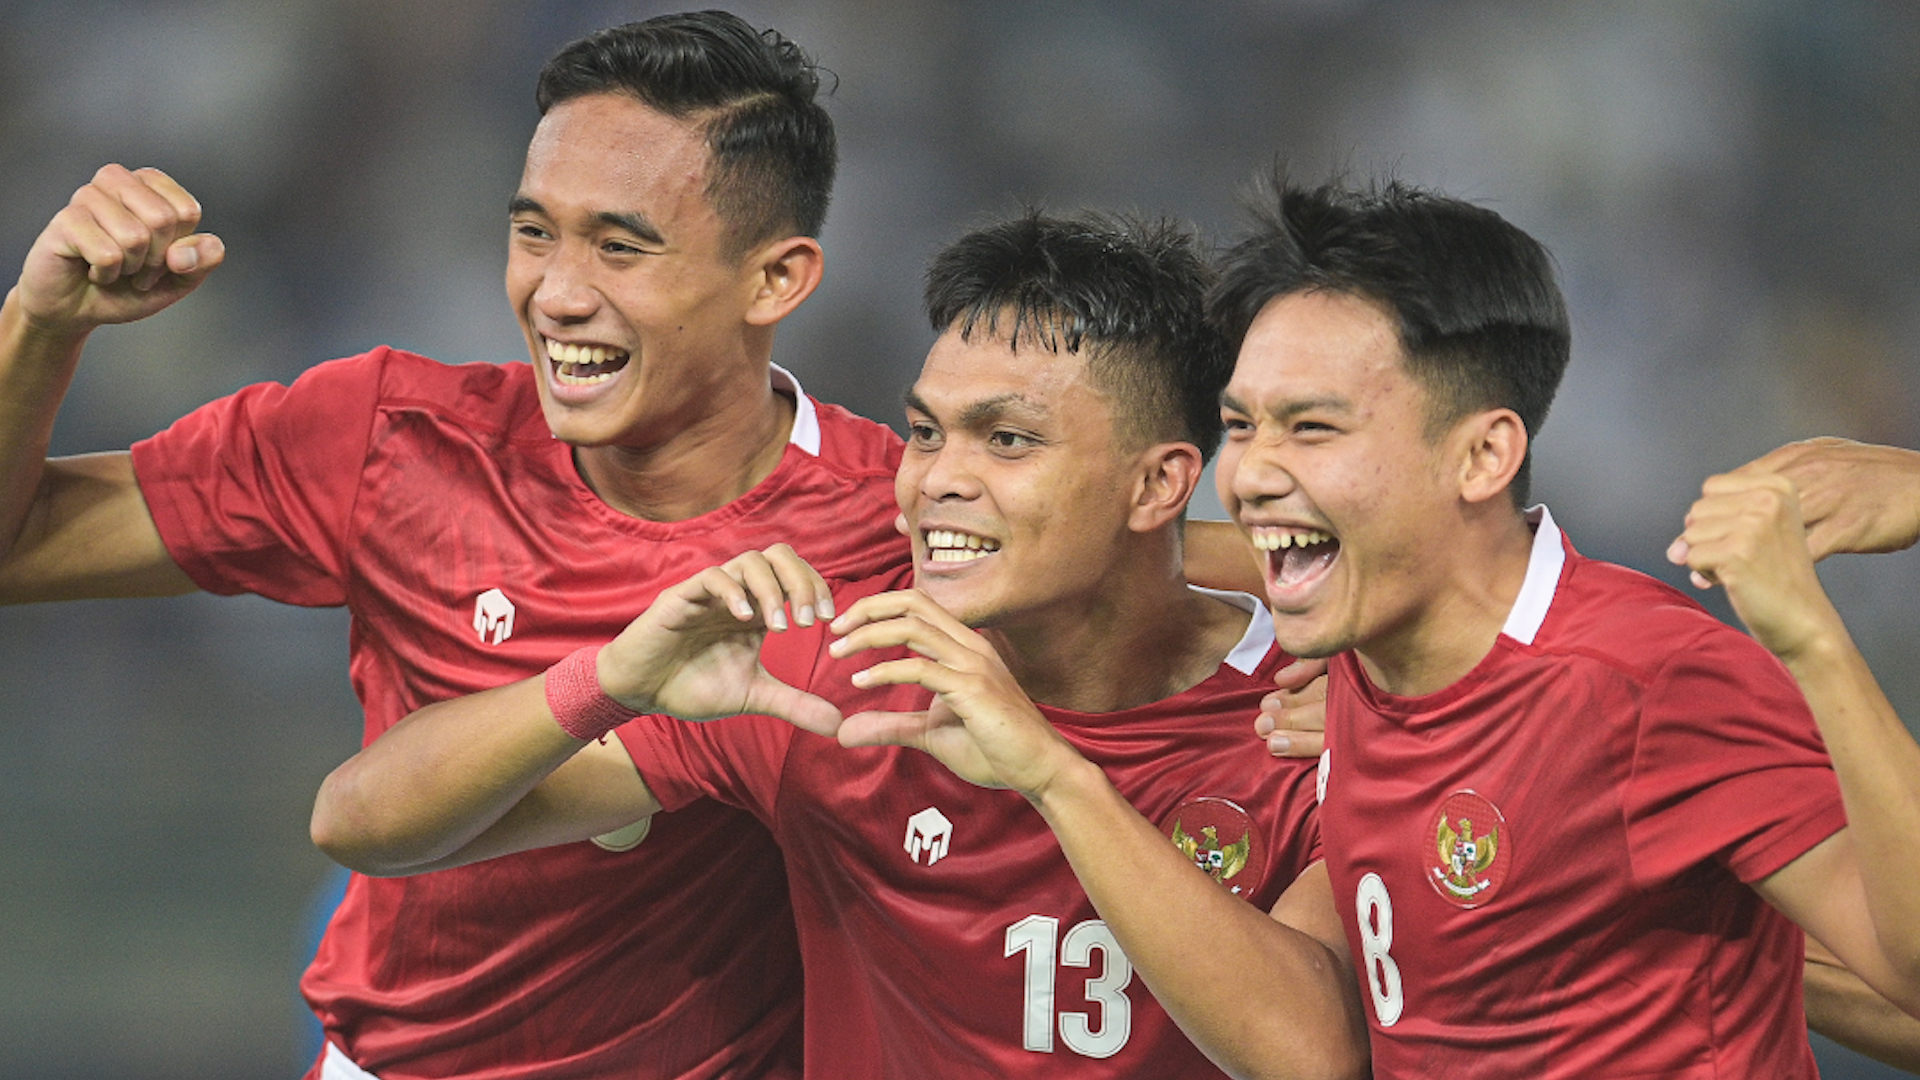 HIGHLIGHT AFC ASIAN CUP QUALIFIERS KUWAIT VS INDONESIA 1-2